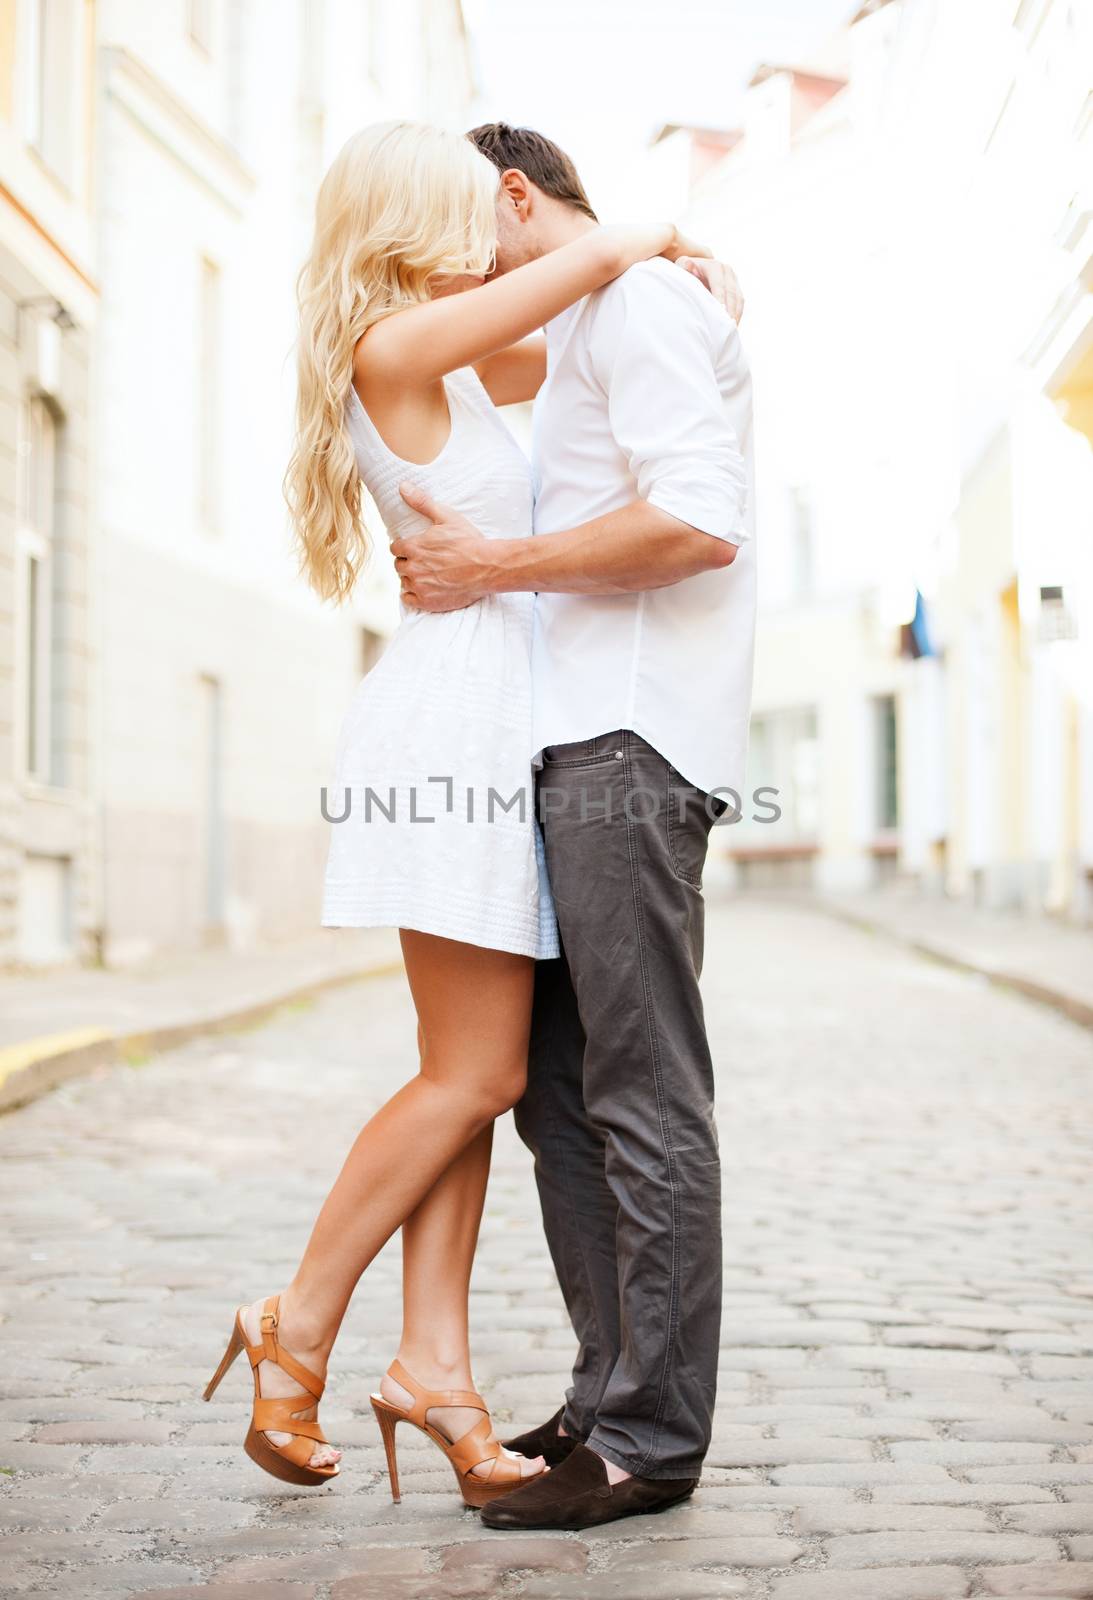 summer holidays and dating concept - couple in the city